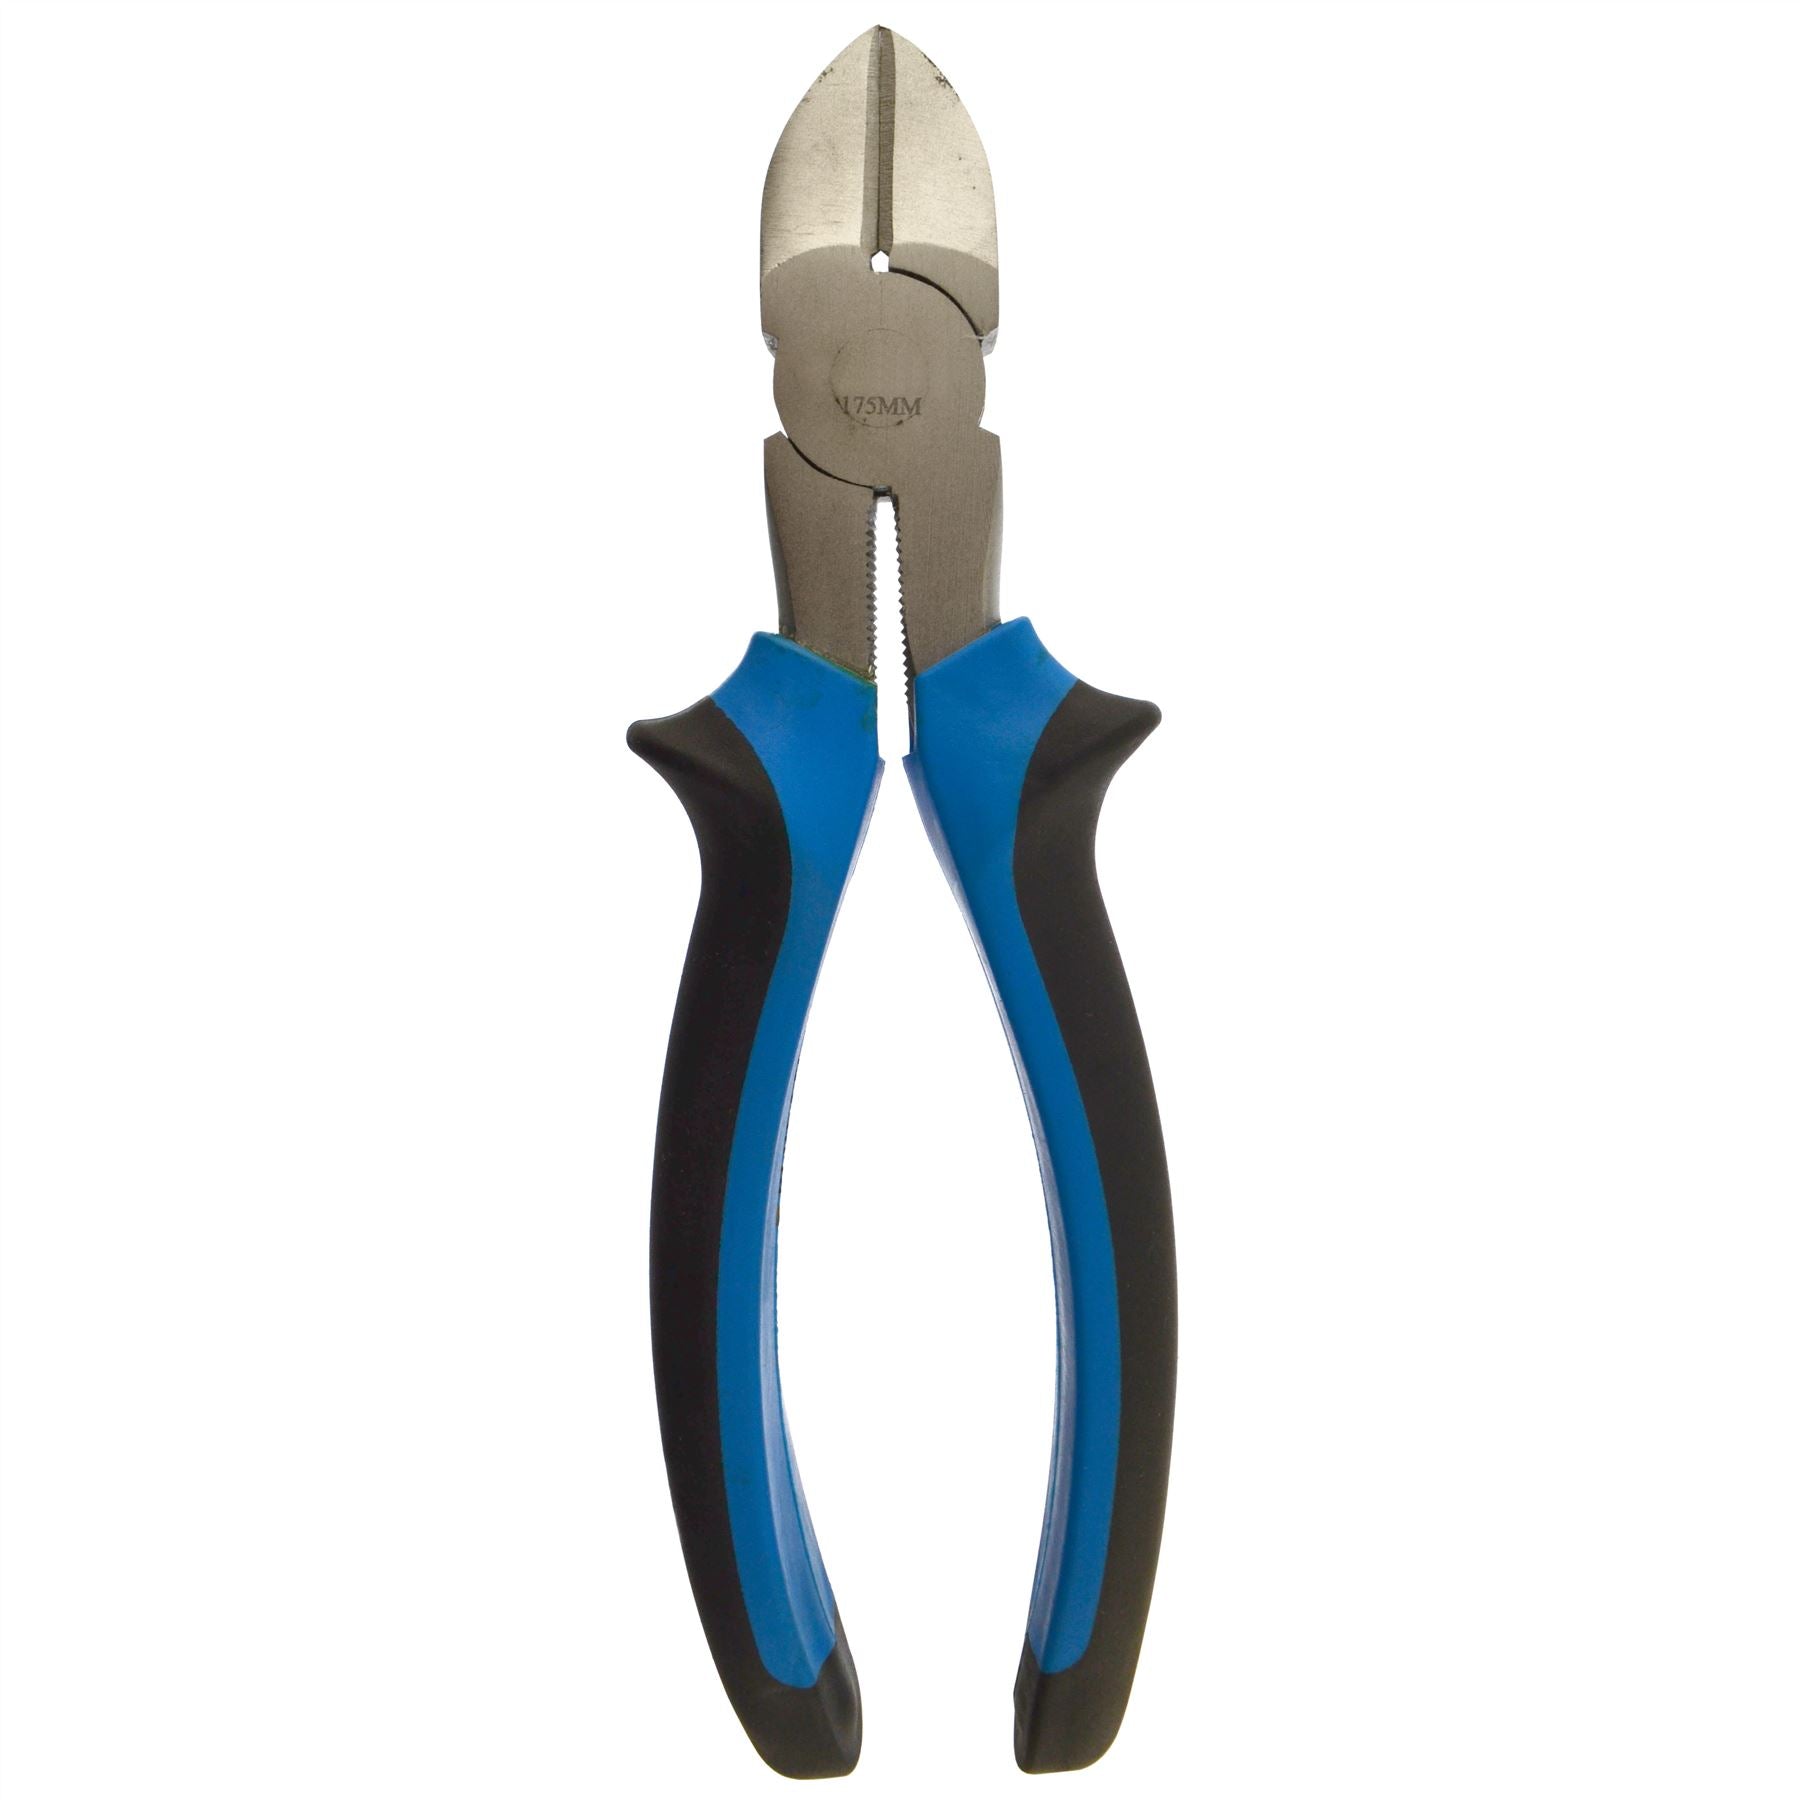 7" / 175mm Electrical Electricians Wire Cut Cutters Cutting Pliers Snips